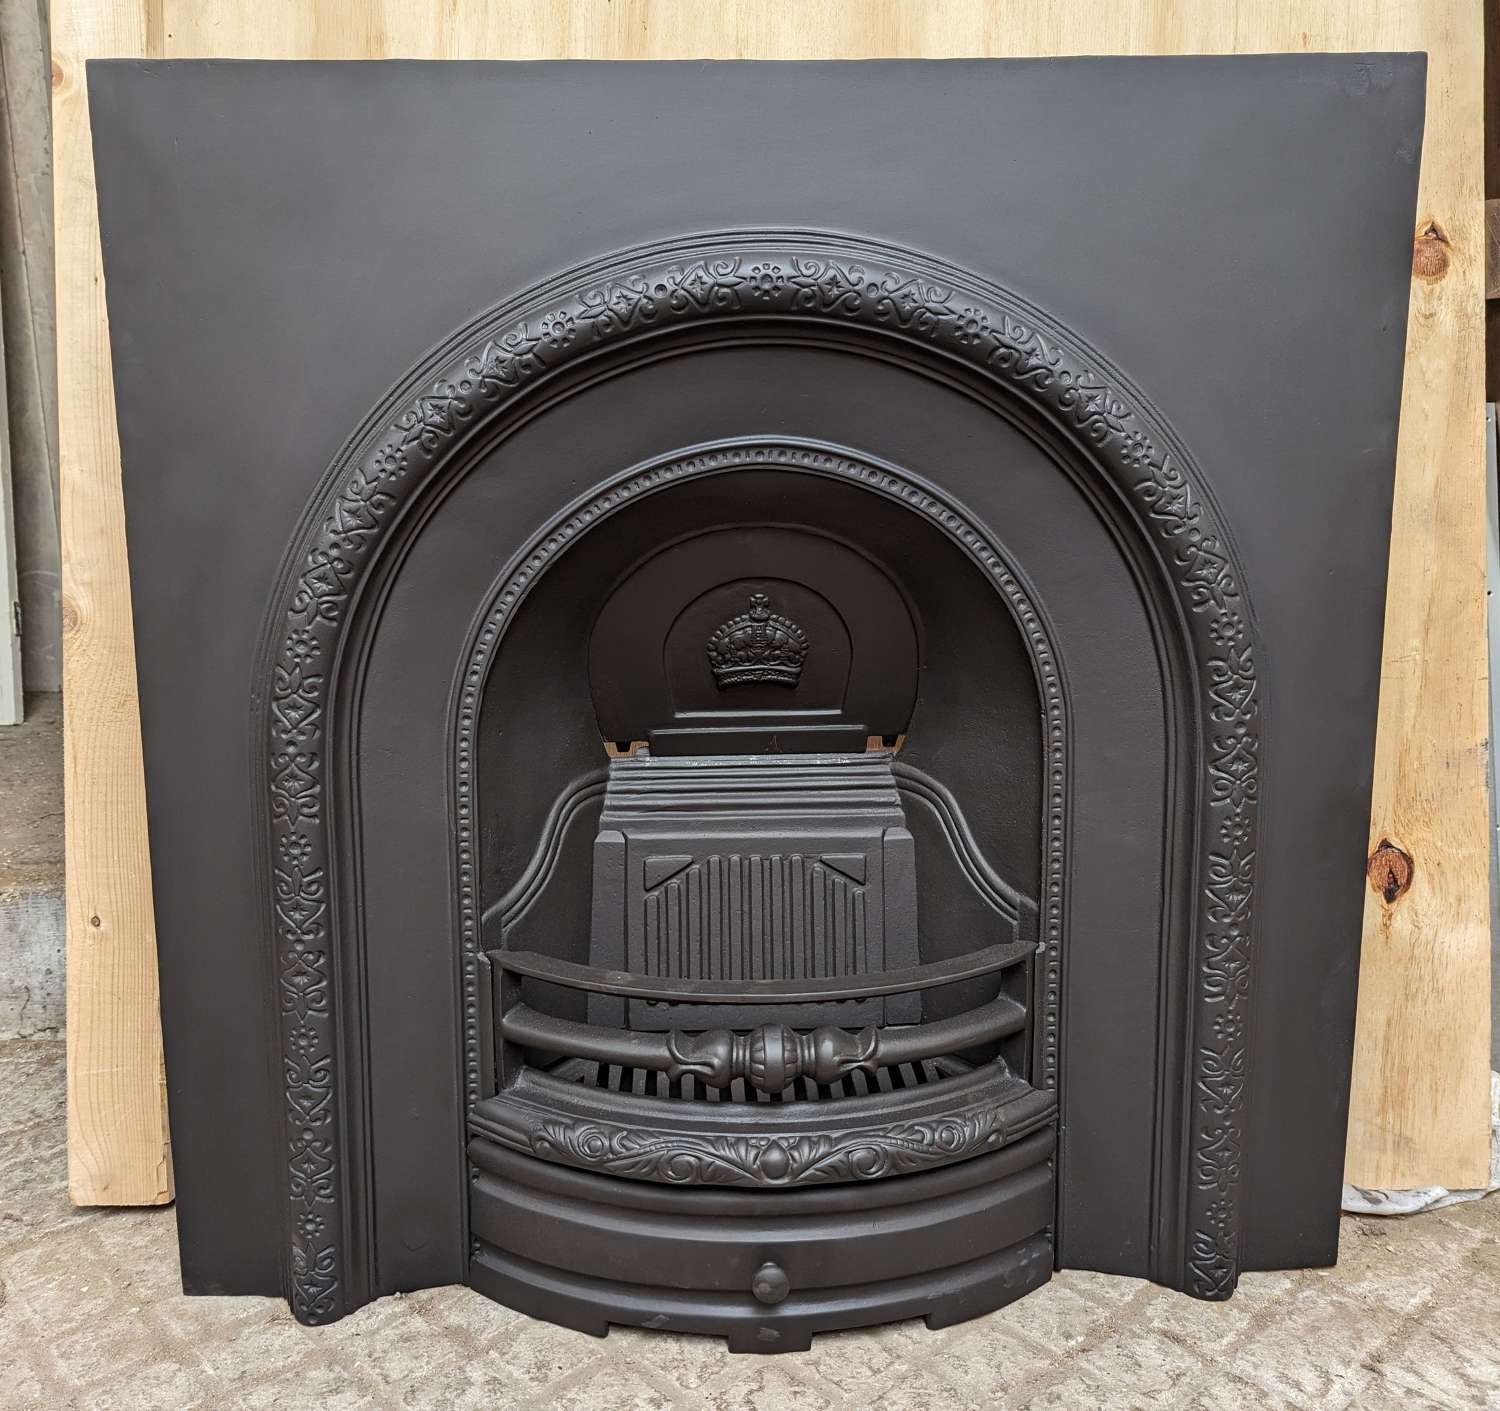 FI0088 RECLAIMED REPRODUCTION CAST IRON ARCHED FIRE INSERT BY GALLERY